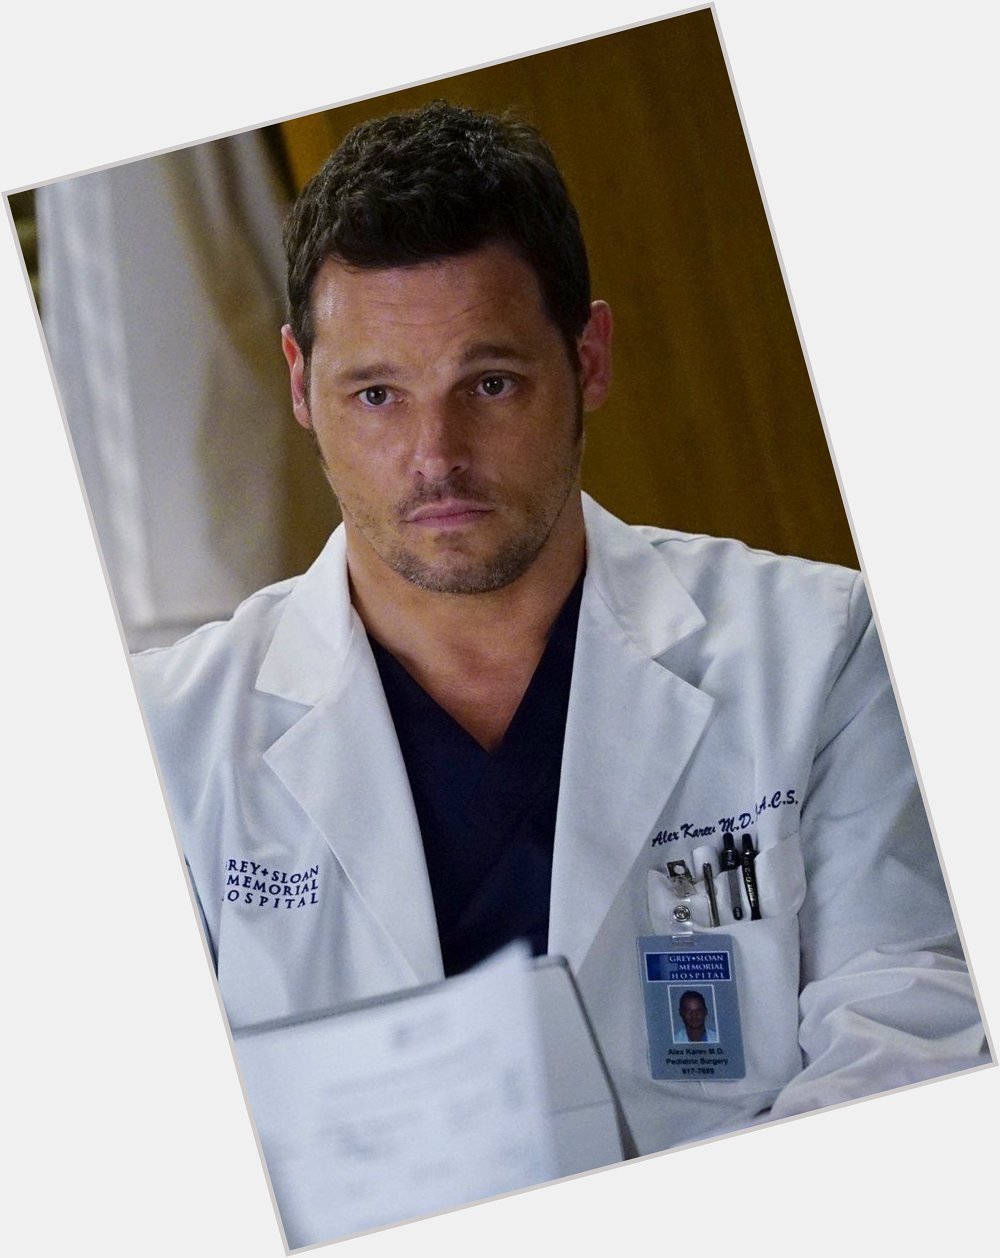 Aniver do maior,
HAPPY BDAY JUSTIN CHAMBERS 